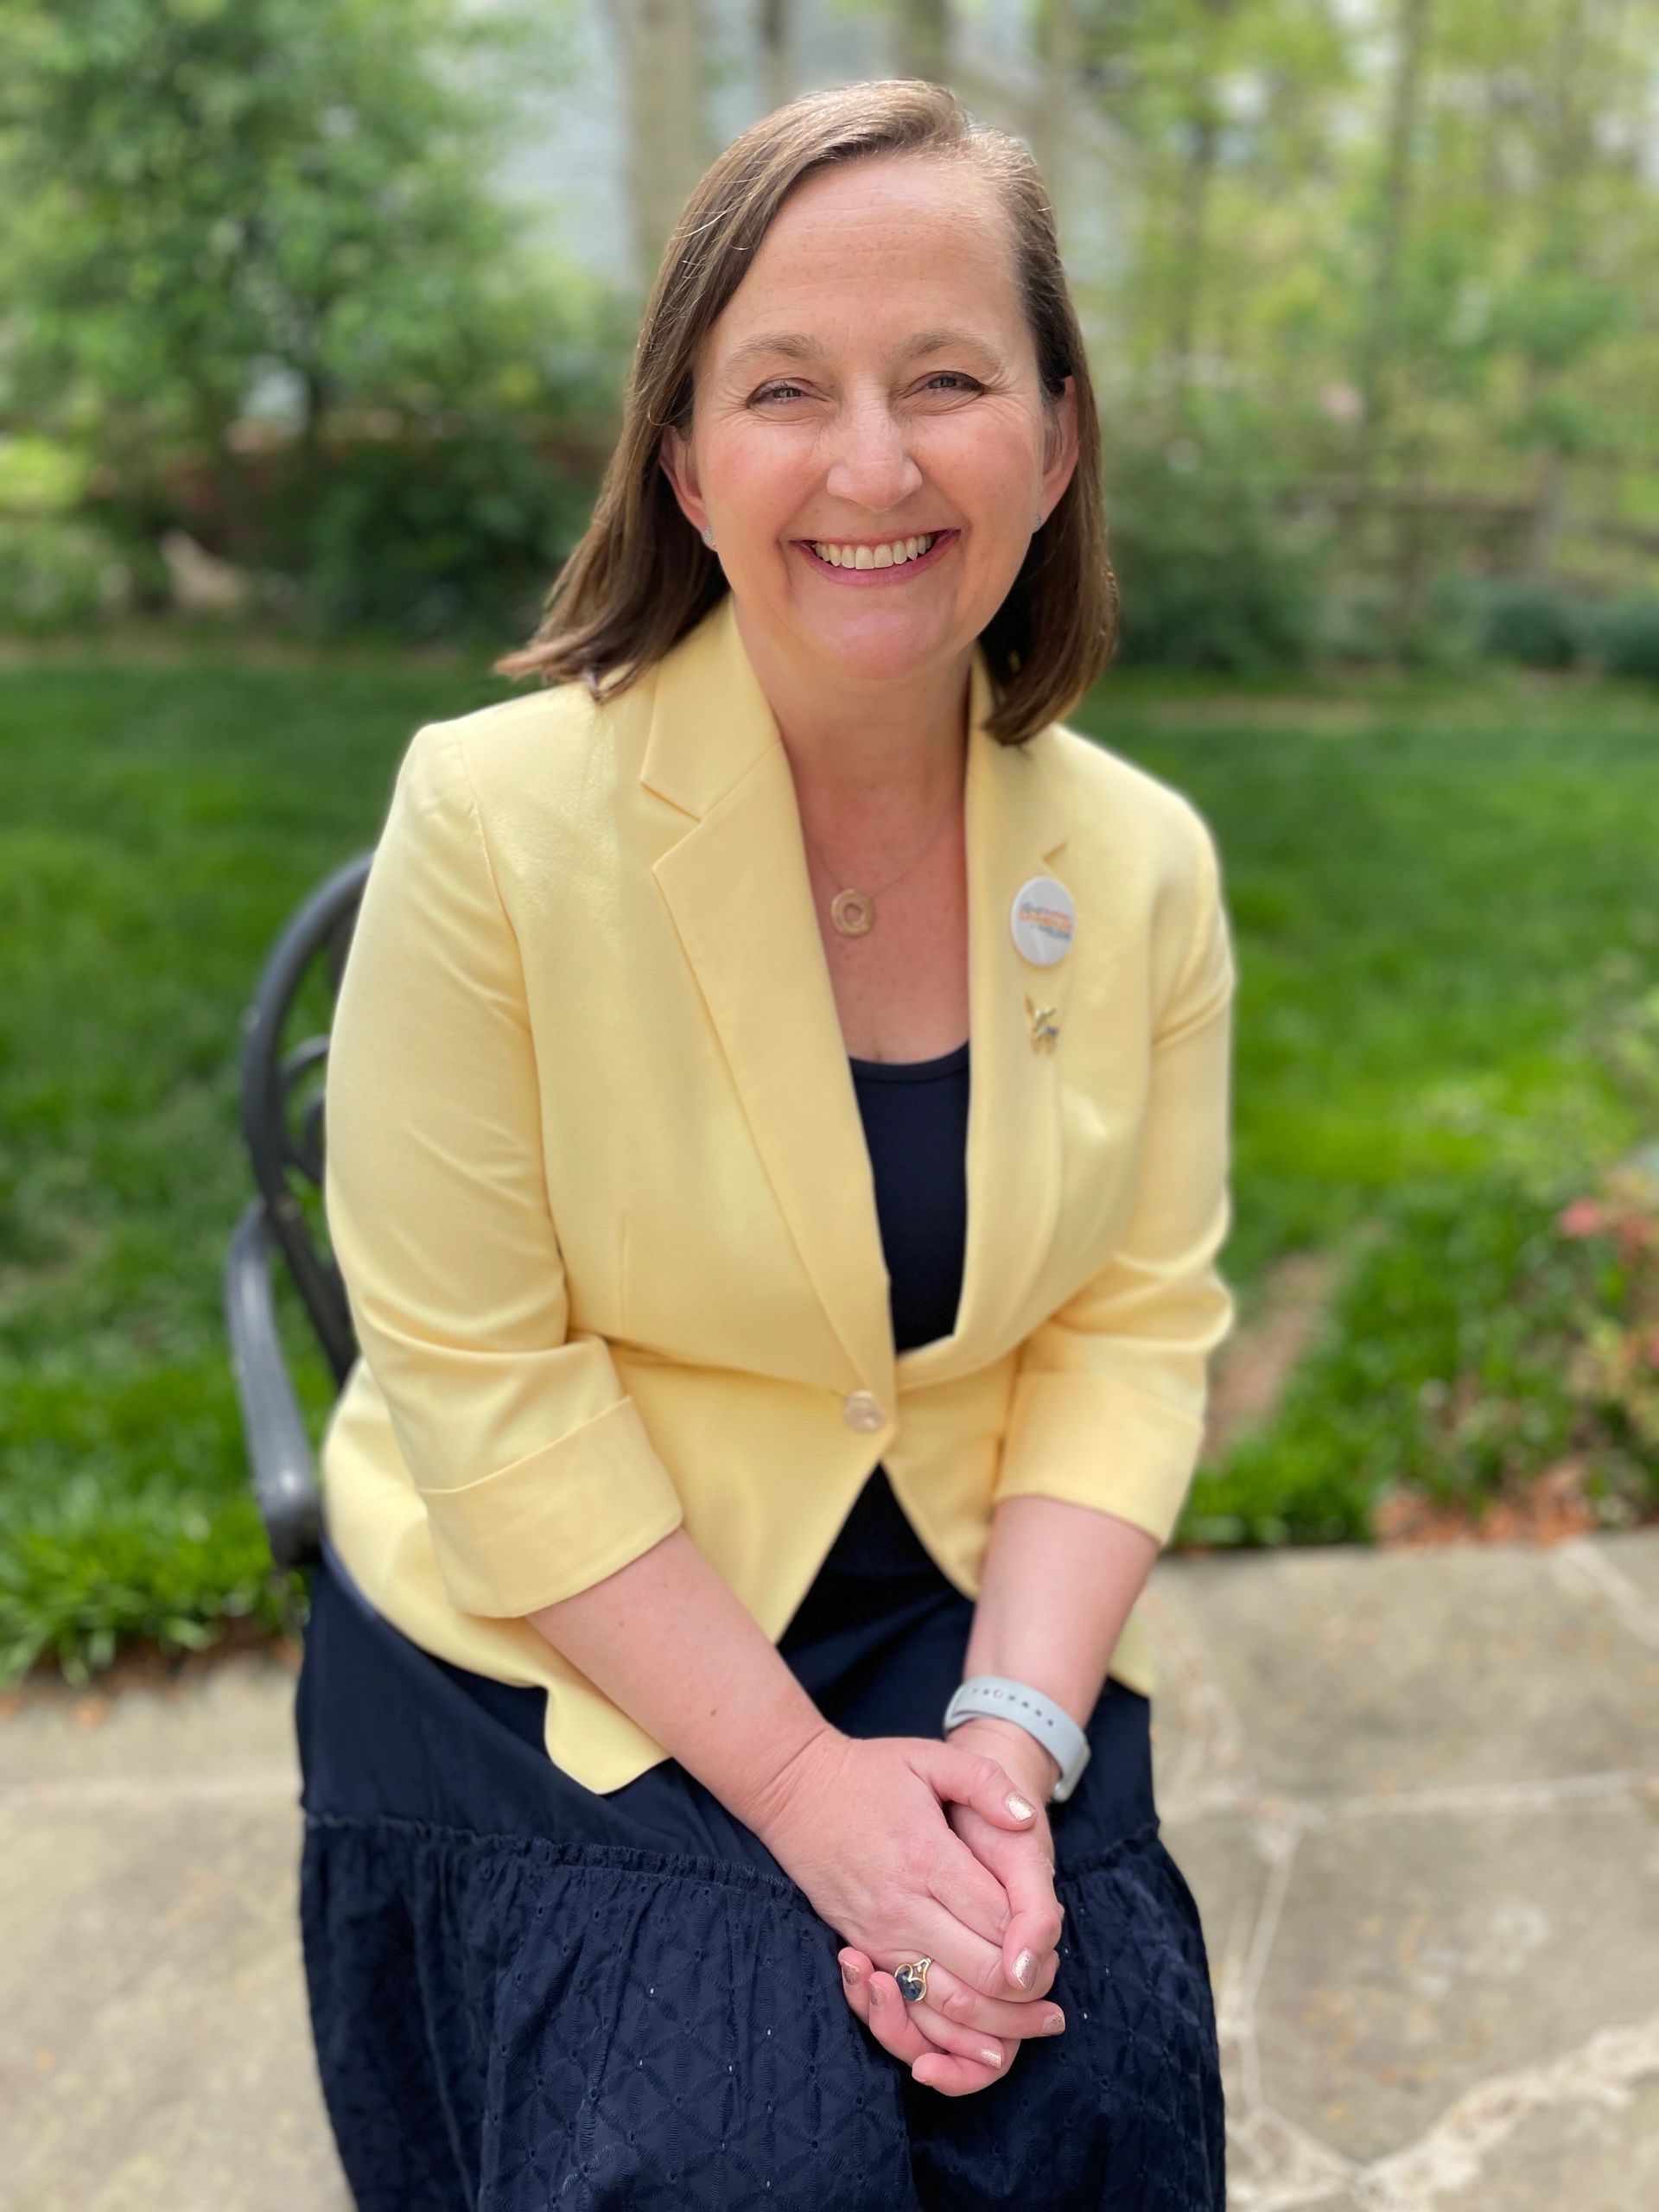 April Chandler Is a Candidate for School Board, Loudoun County Public